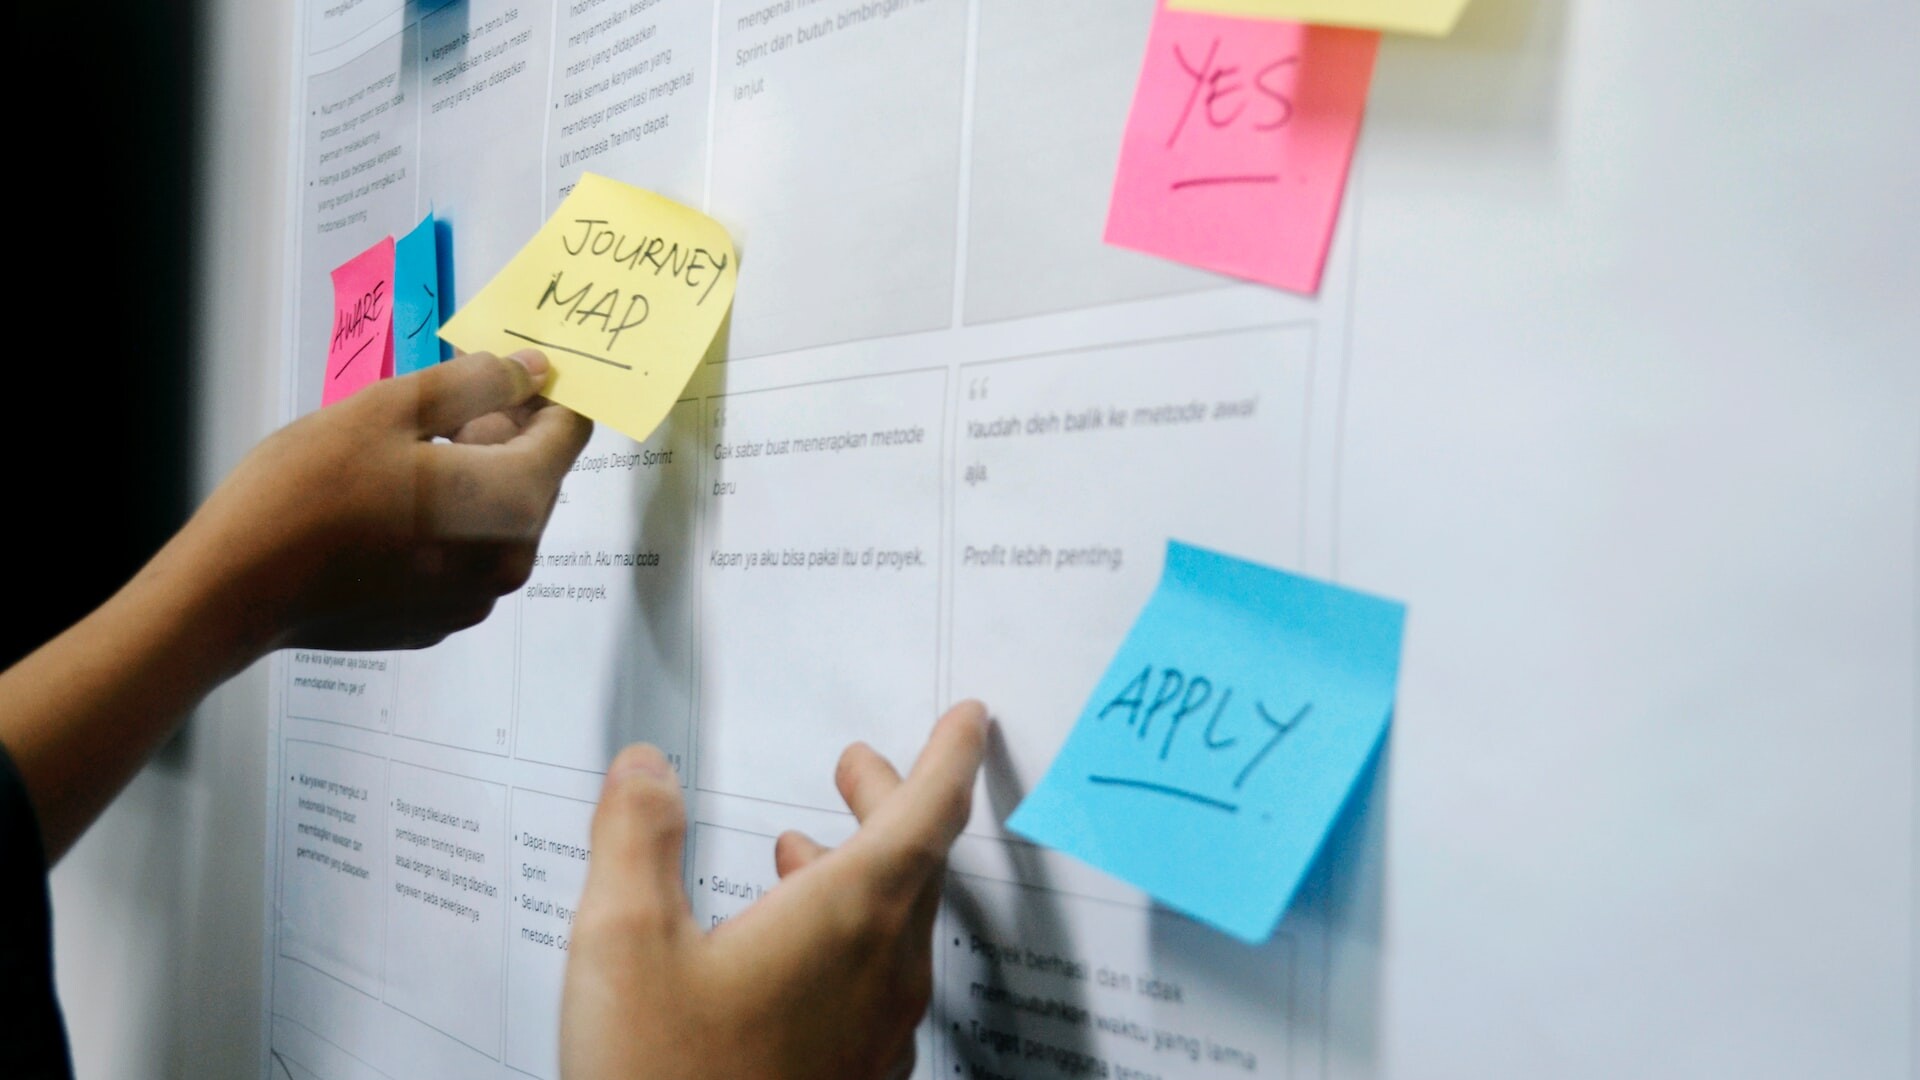 Users use sticky note in user testing session.